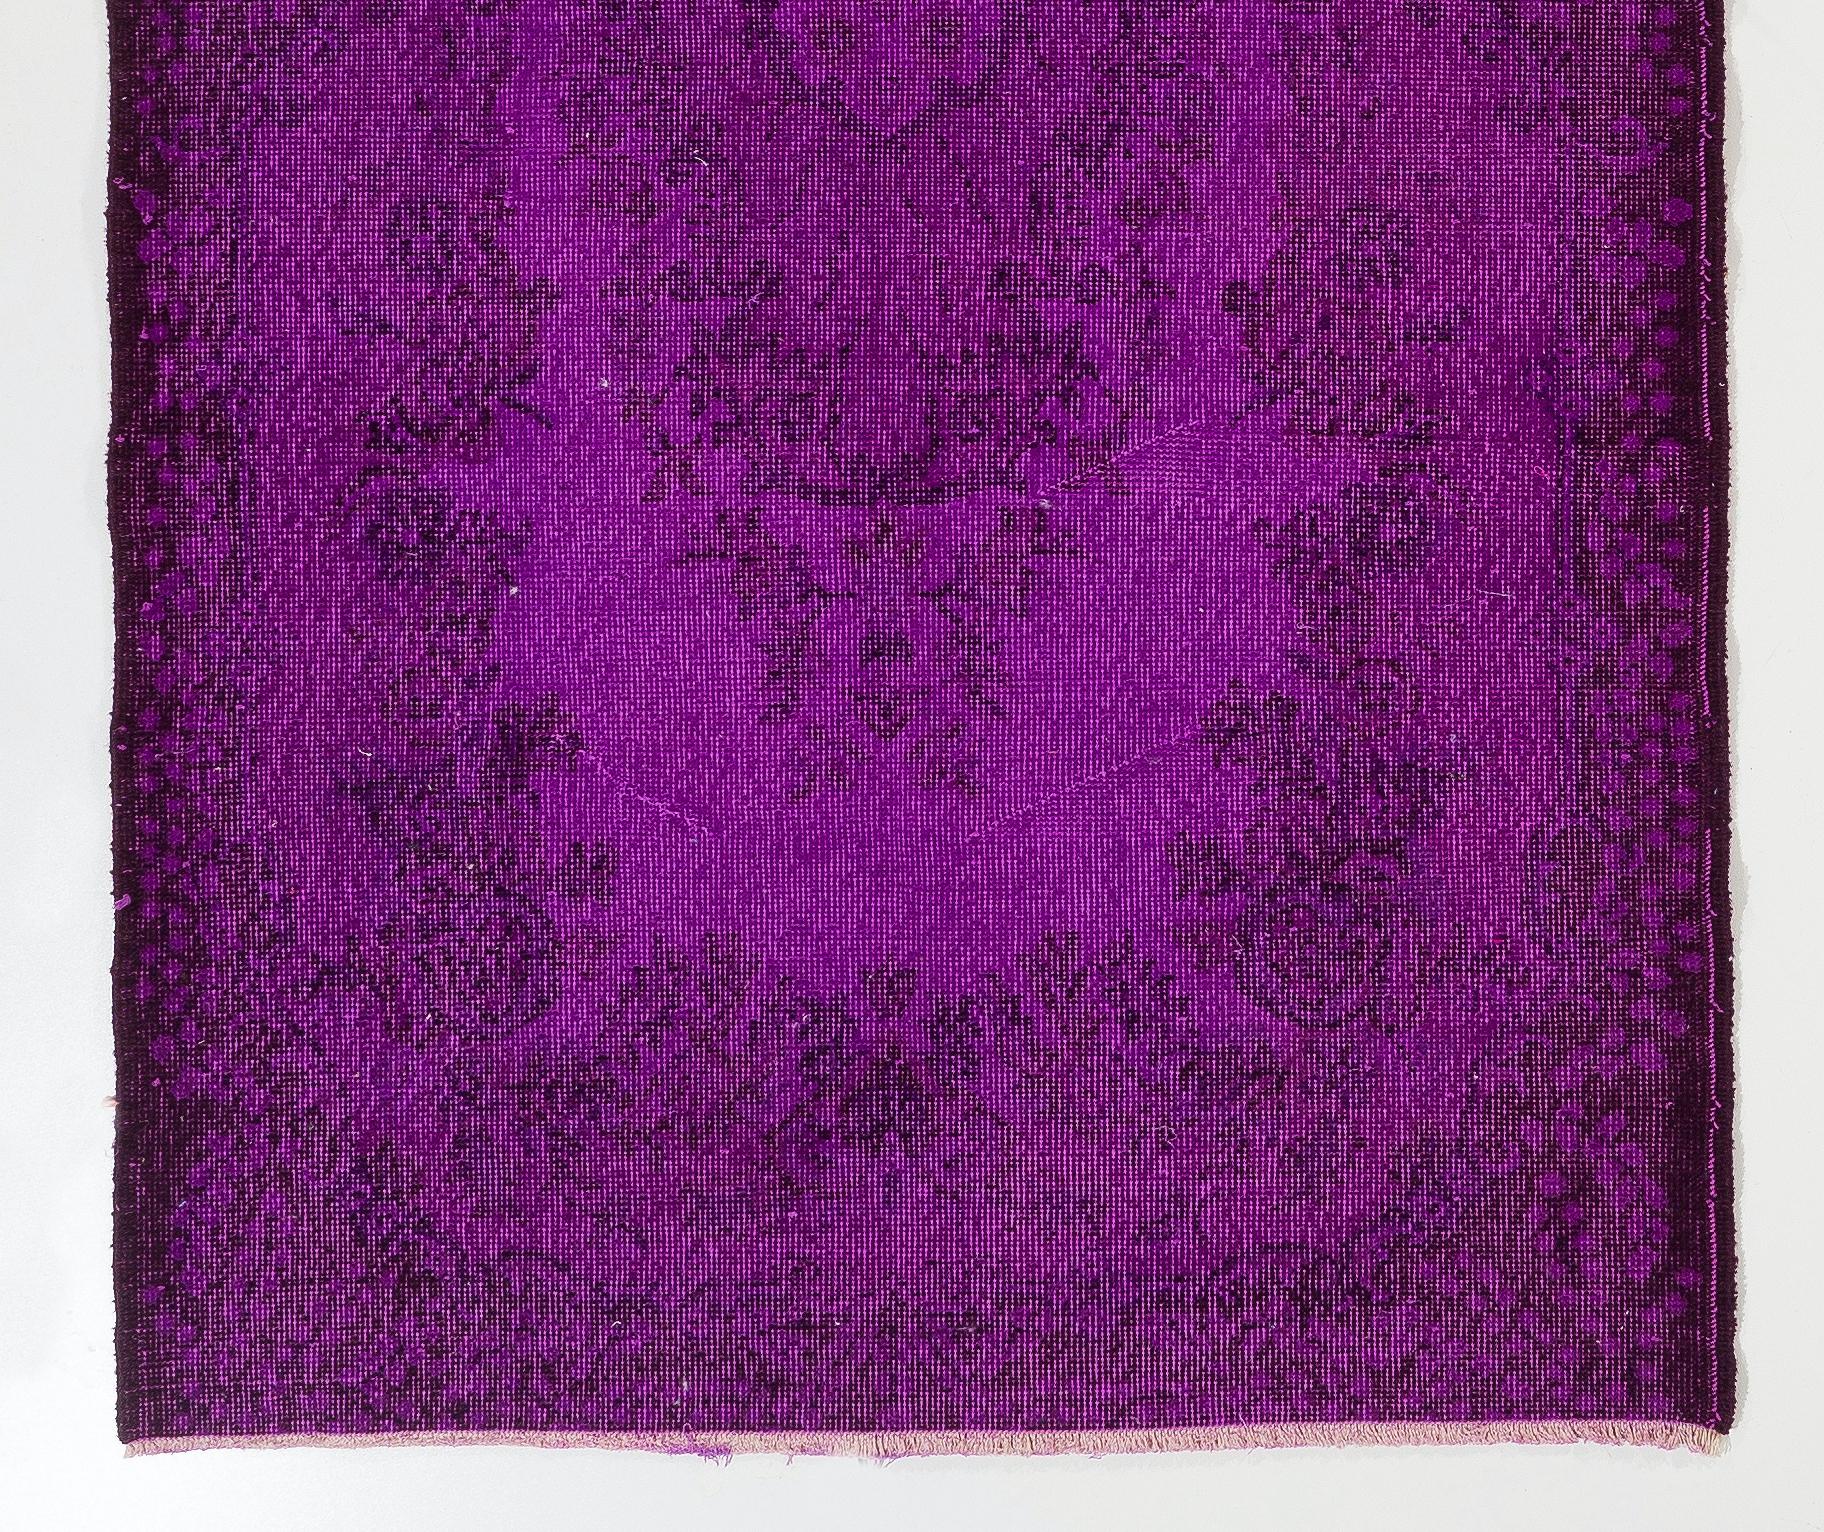 A vintage Turkish accent rug over-dyed in purple color. The rug is finely hand-knotted, has low wool pile on cotton foundation. It is in very good condition, professionally washed, sturdy and suitable for areas with high foot traffic. Measures: 4x7